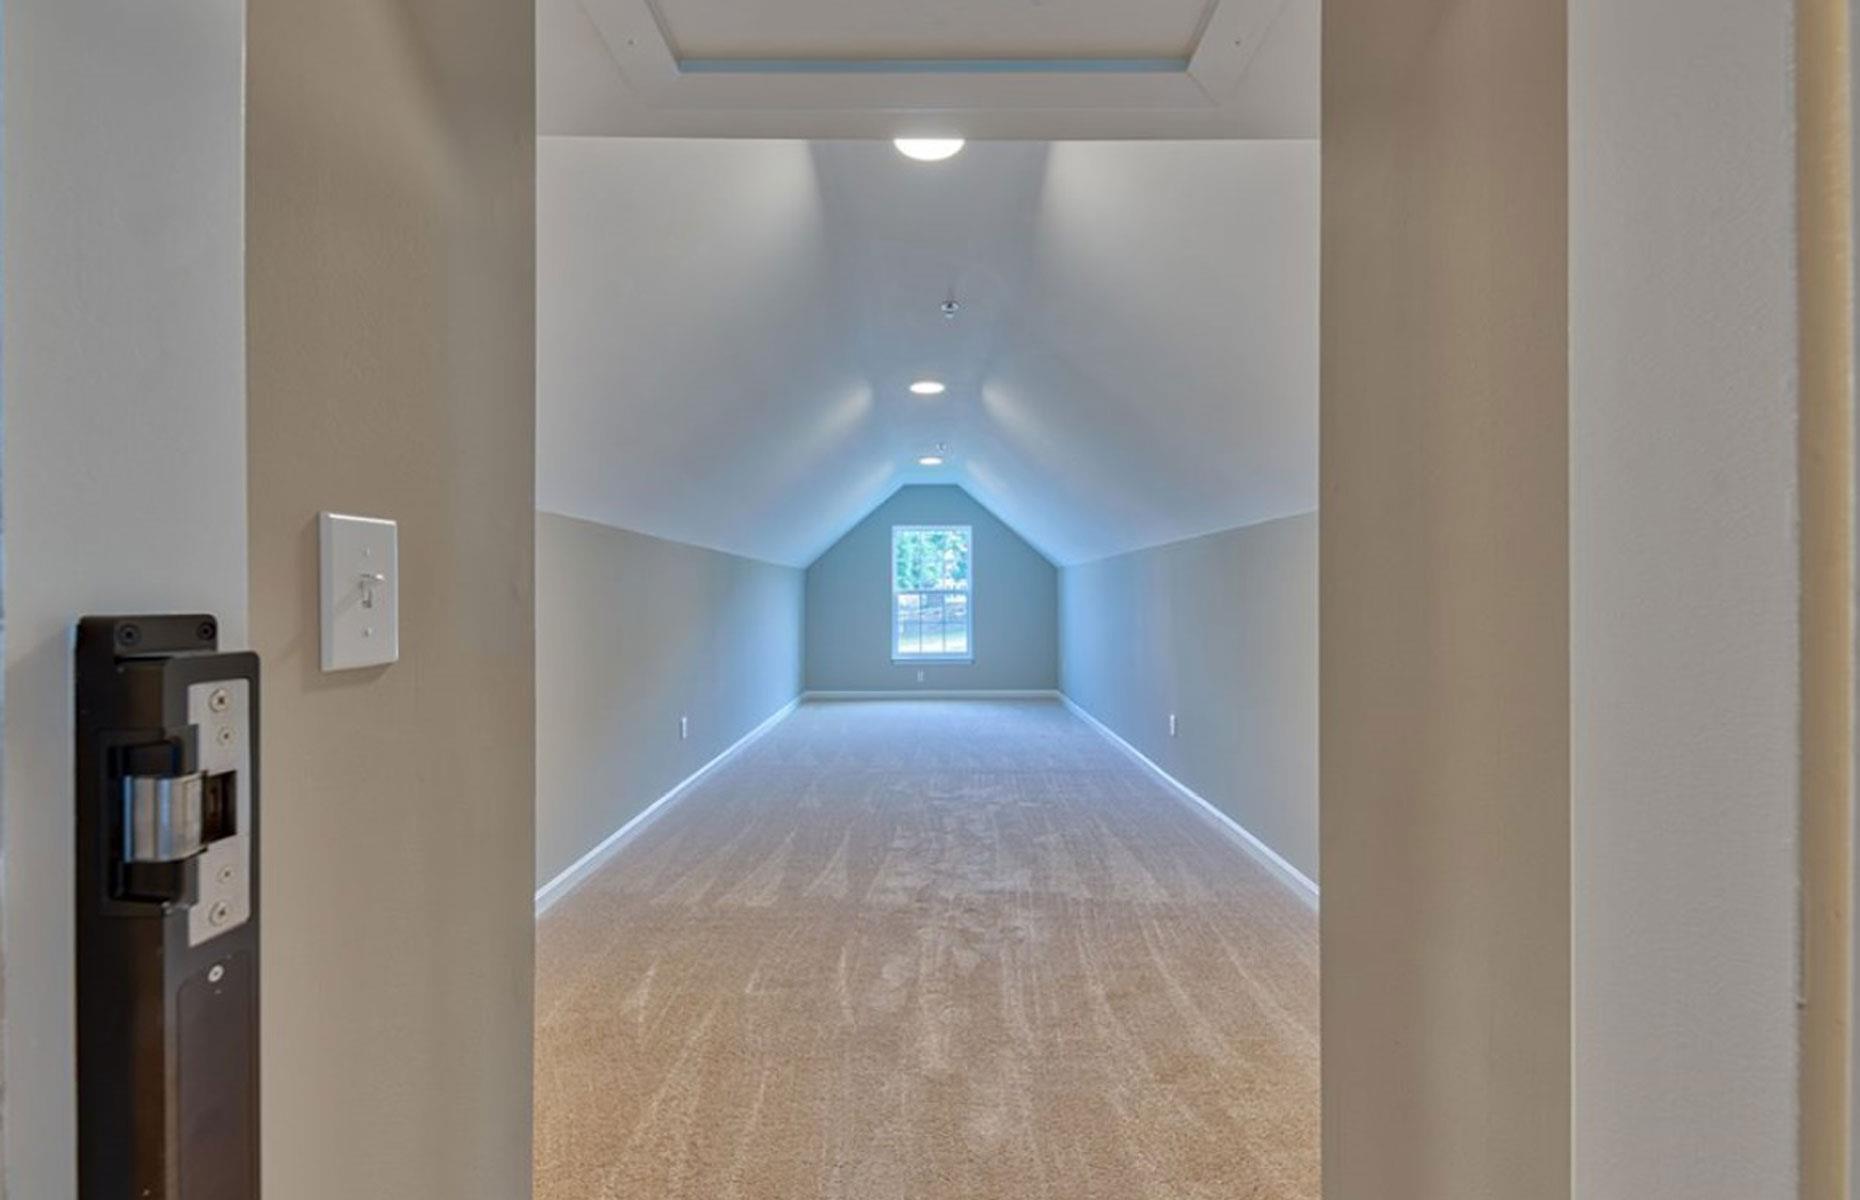 A nice touch from the developer, the hidden loft space is cleverly concealed behind a mirror, and would work brilliantly as a man cave, children's playroom or calming retreat in which to relax and unwind.